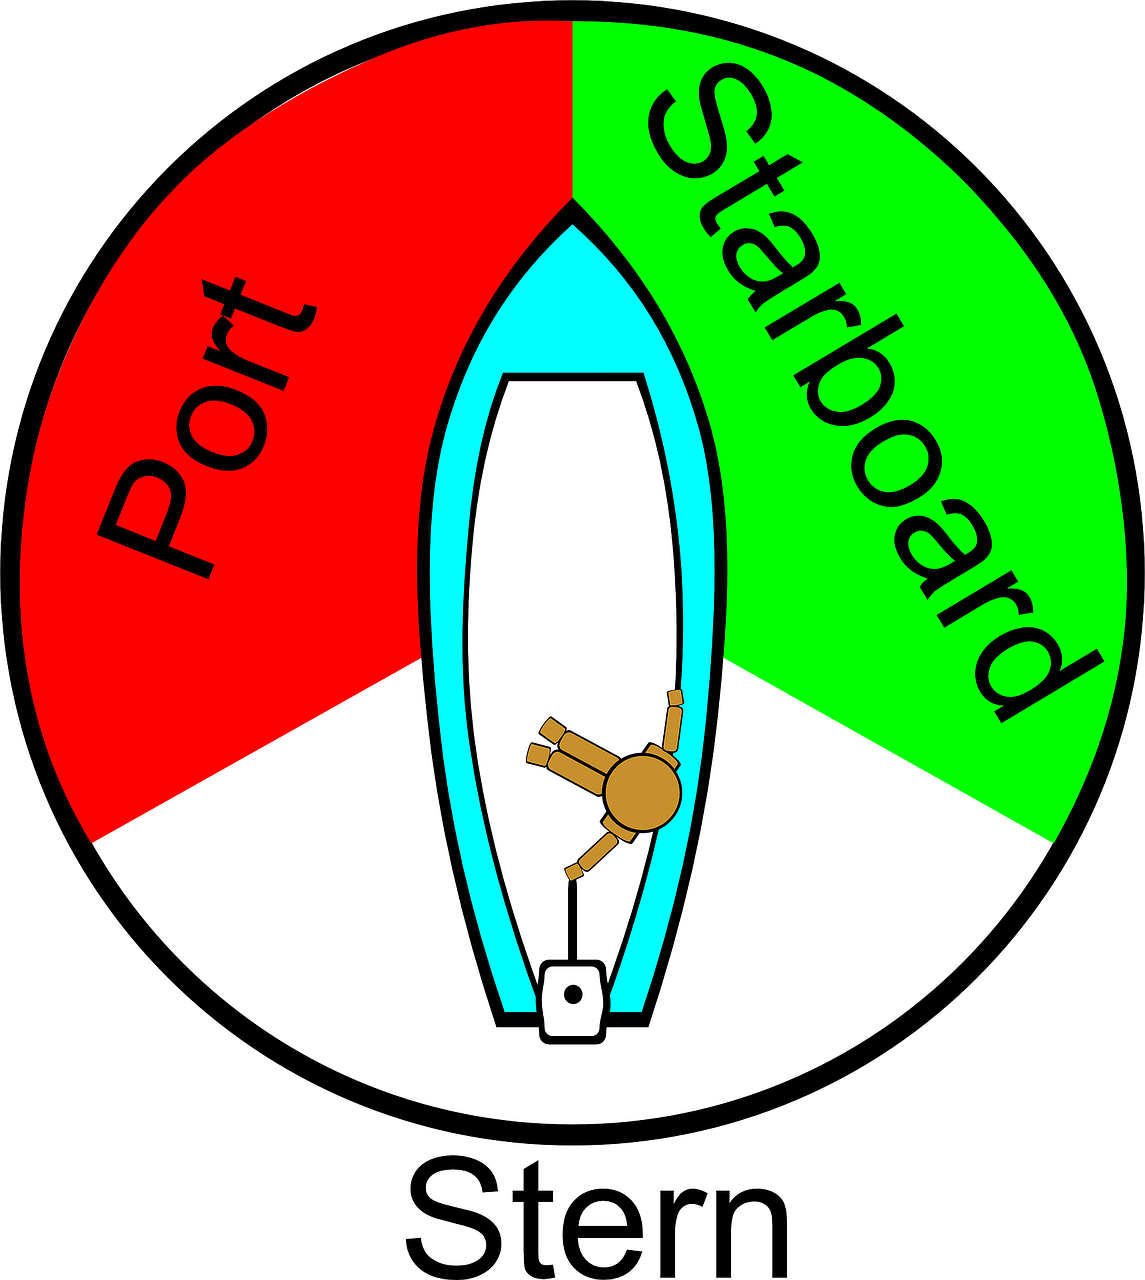 graphic showing the port and starboard sides of a boat